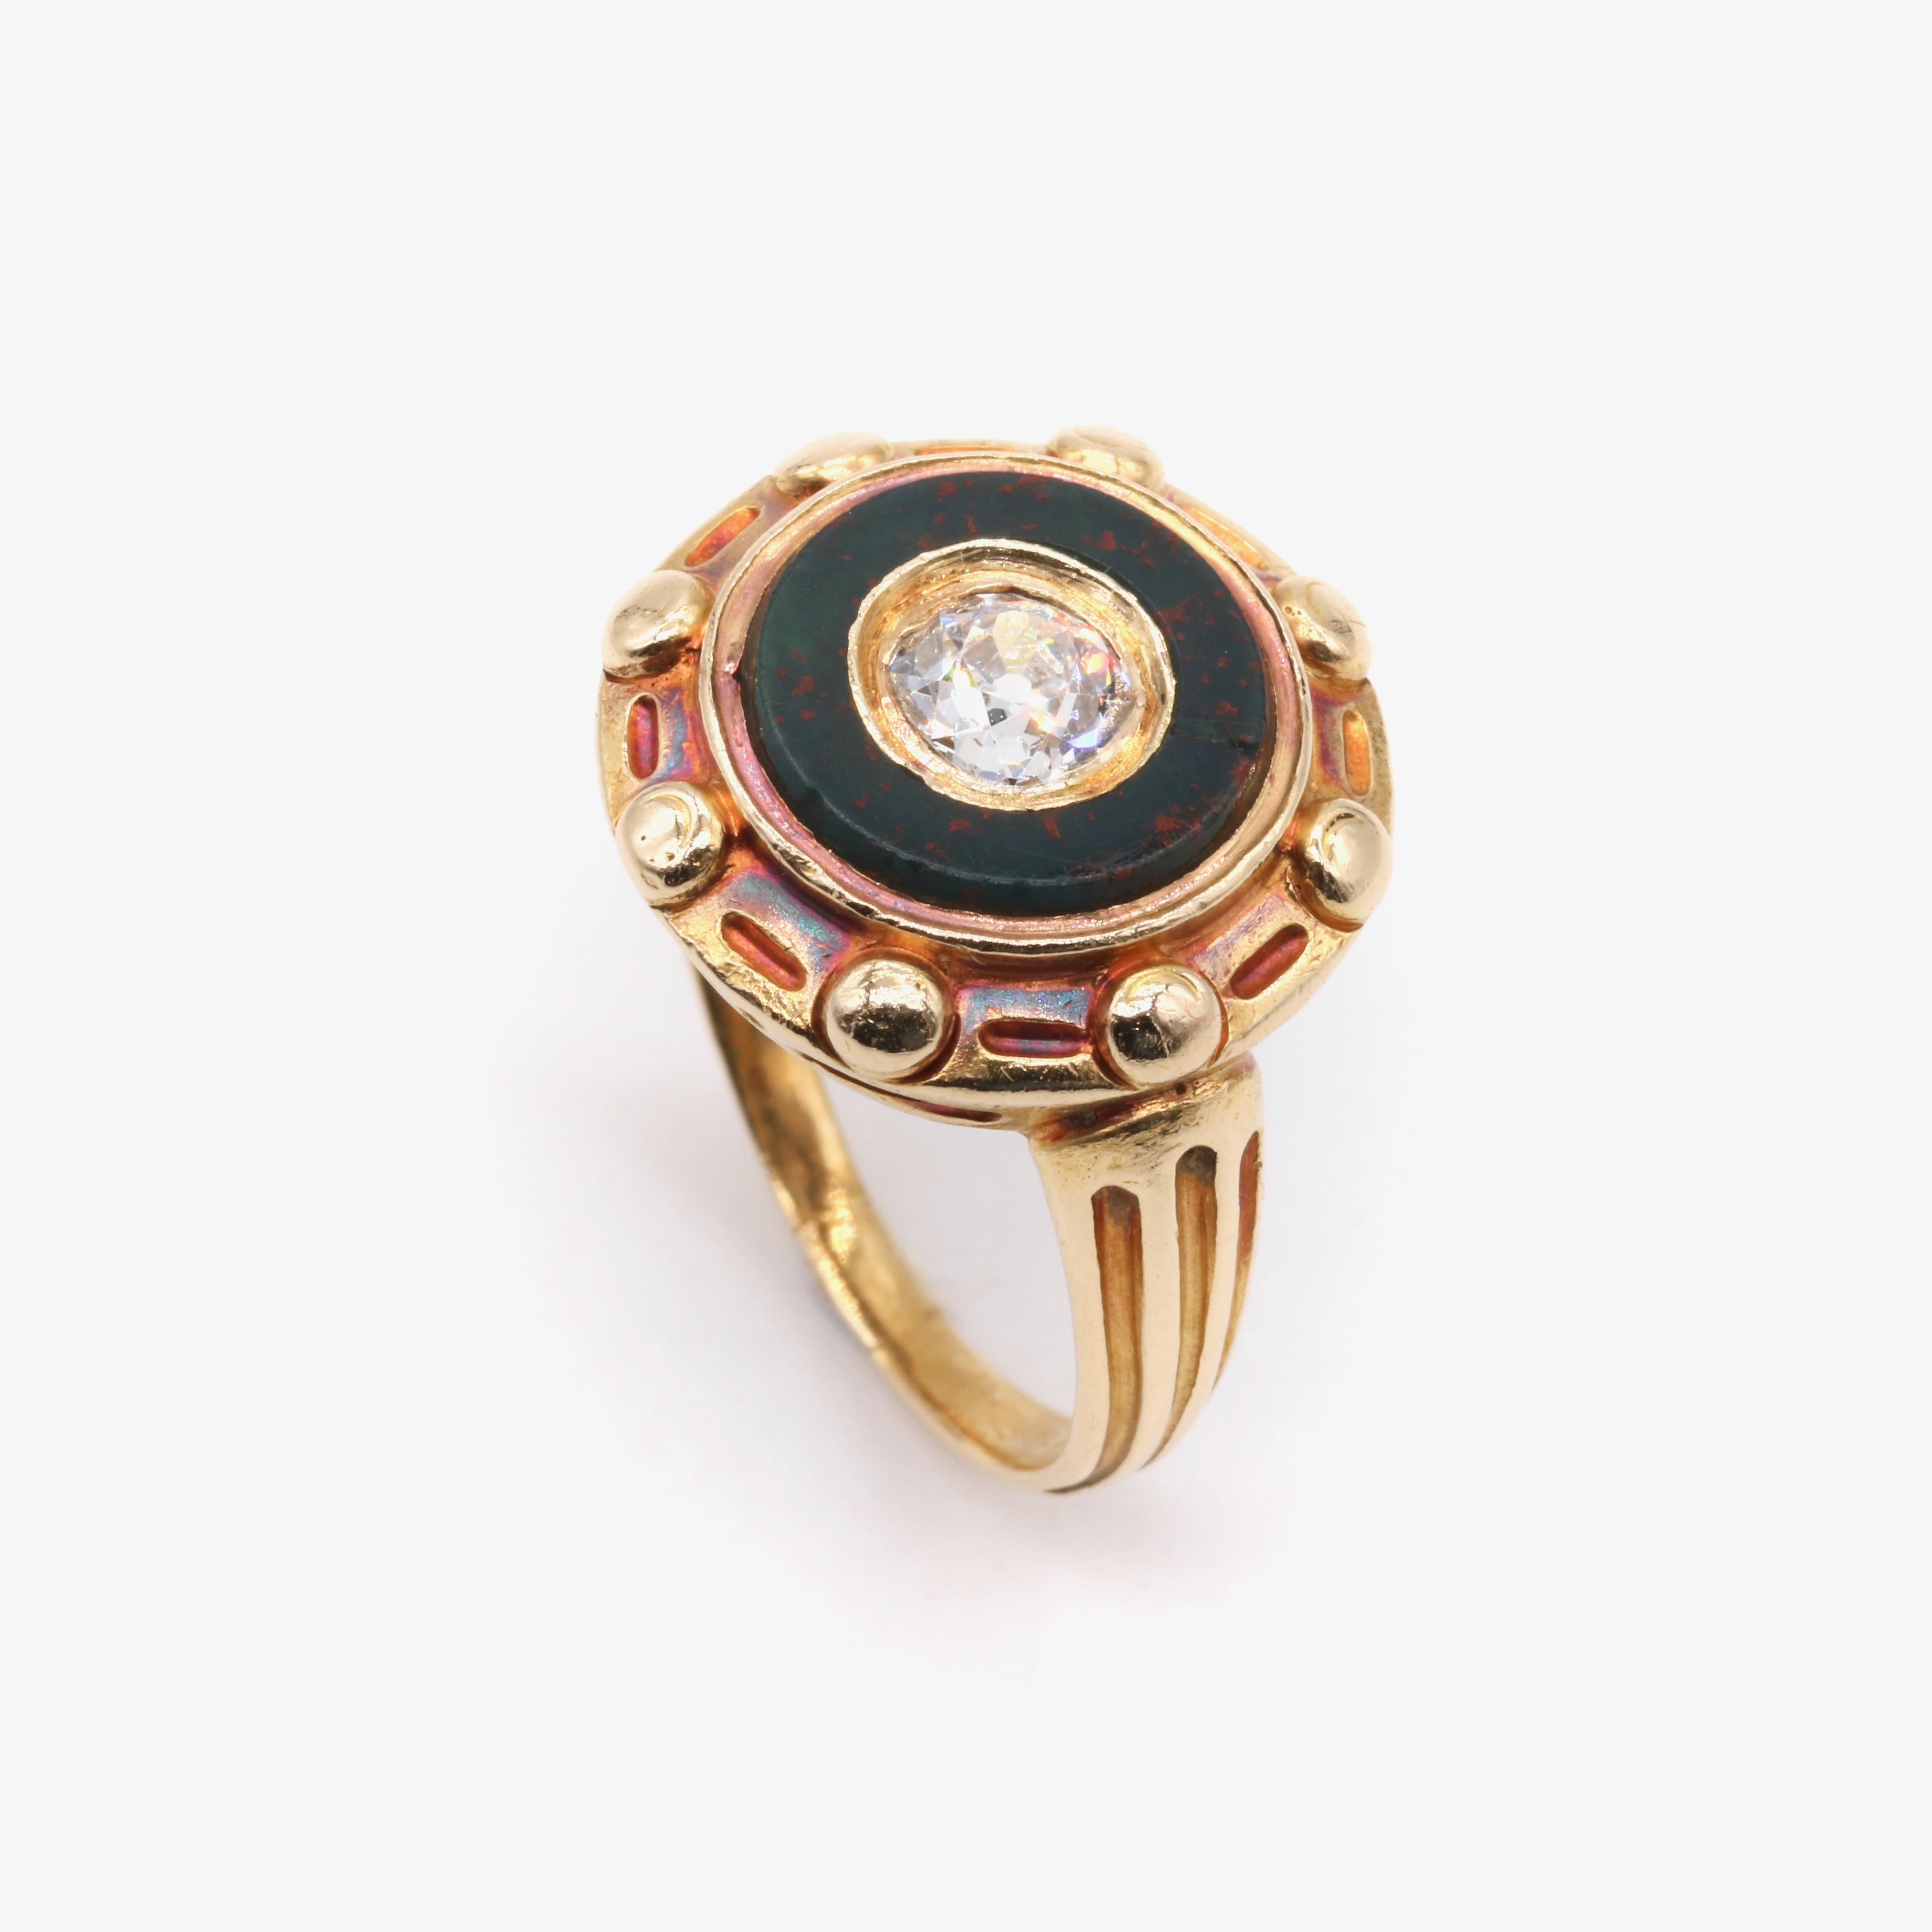 Antique Victorian 1850s 18K Yellow Gold 0.53ct Diamond & Bloodstone Target Ring For Sale 4